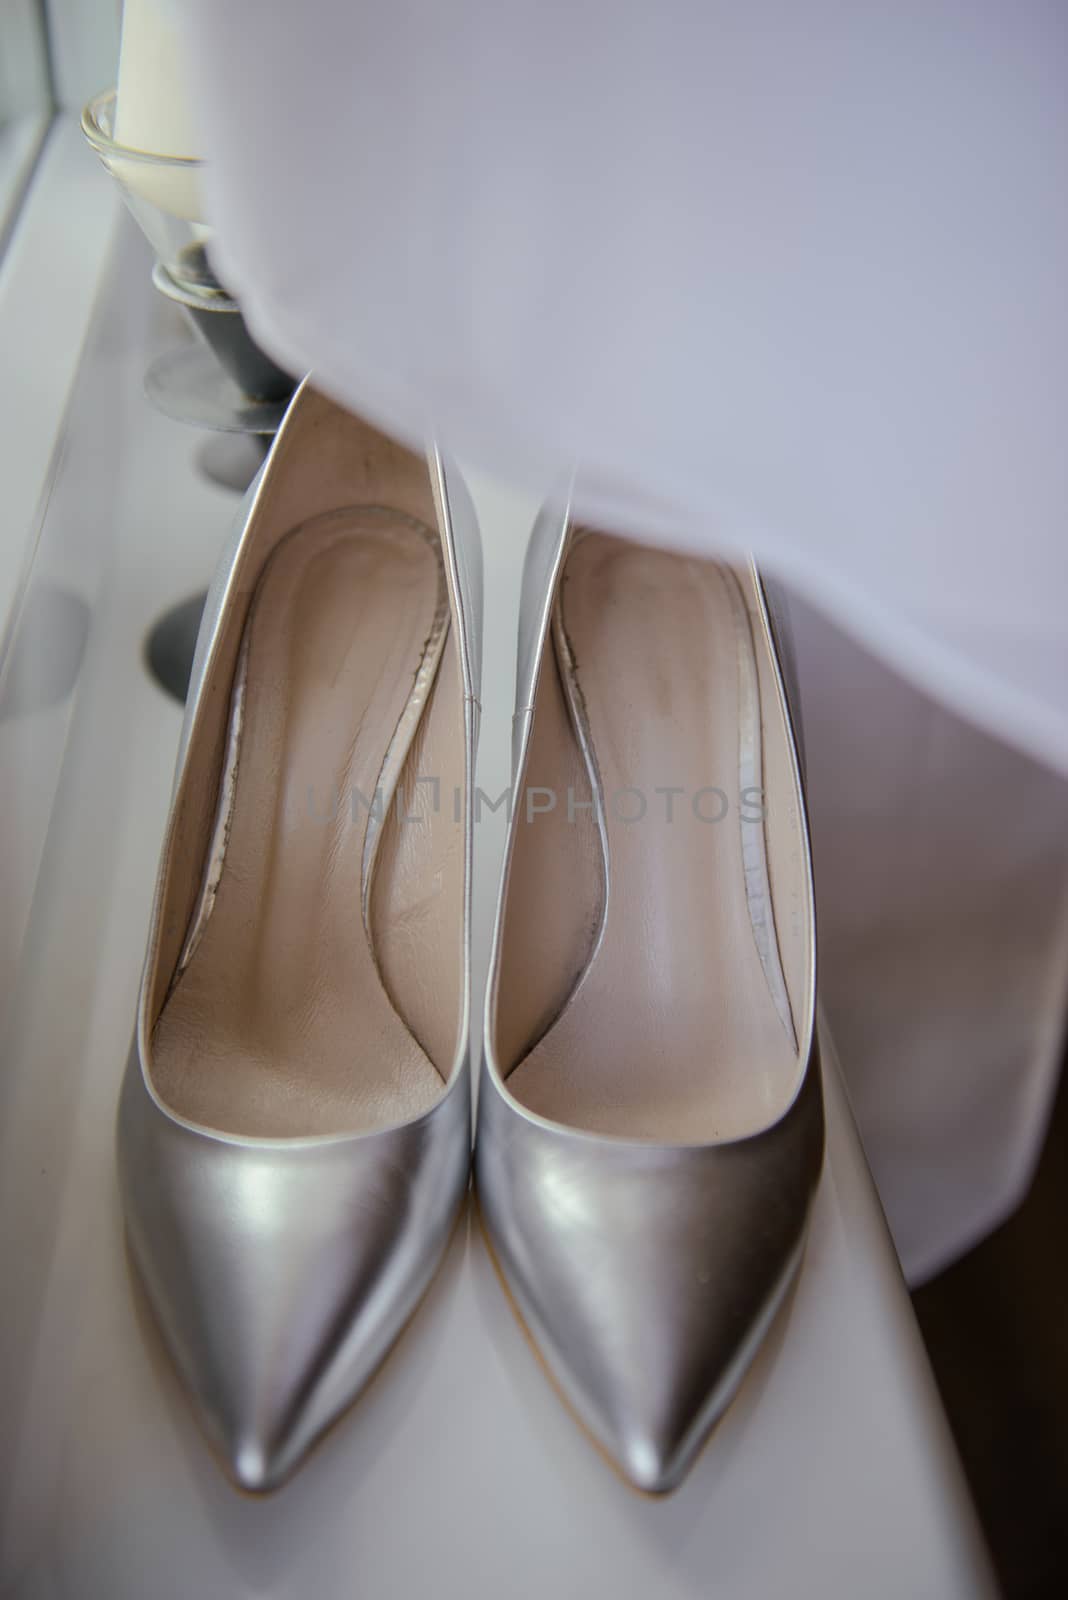 The bride shows white wedding shoes. Wedding detail. Close up